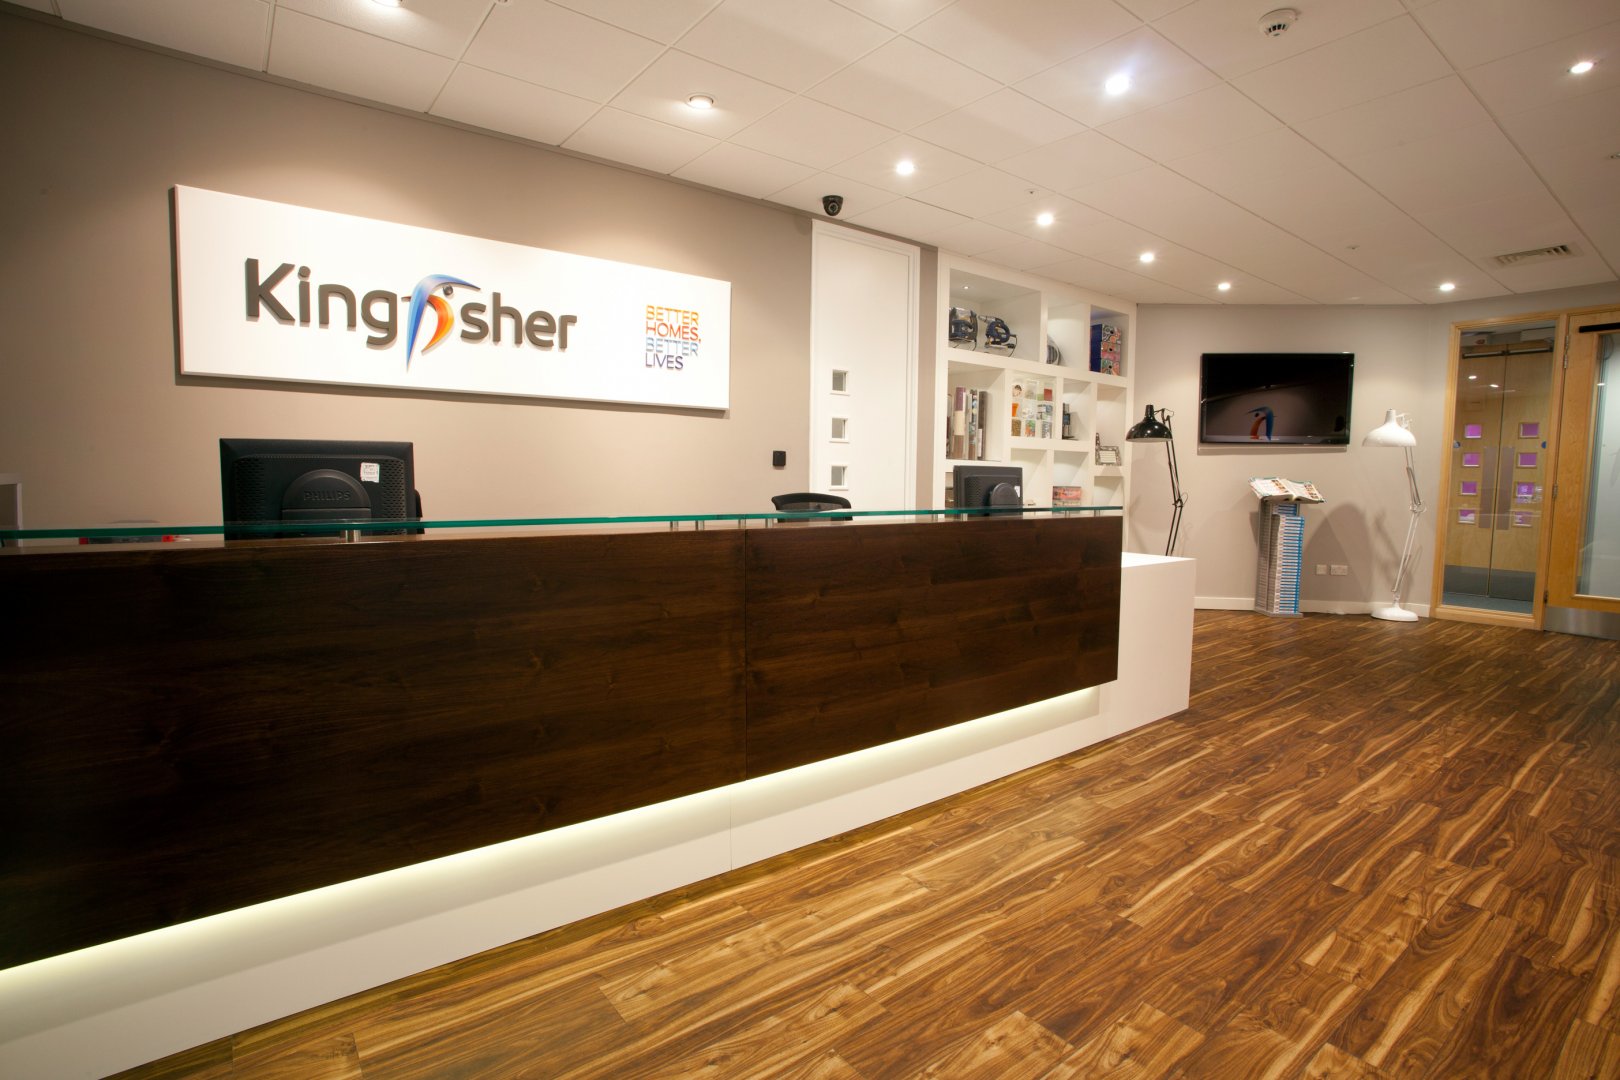 Kingfisher office building